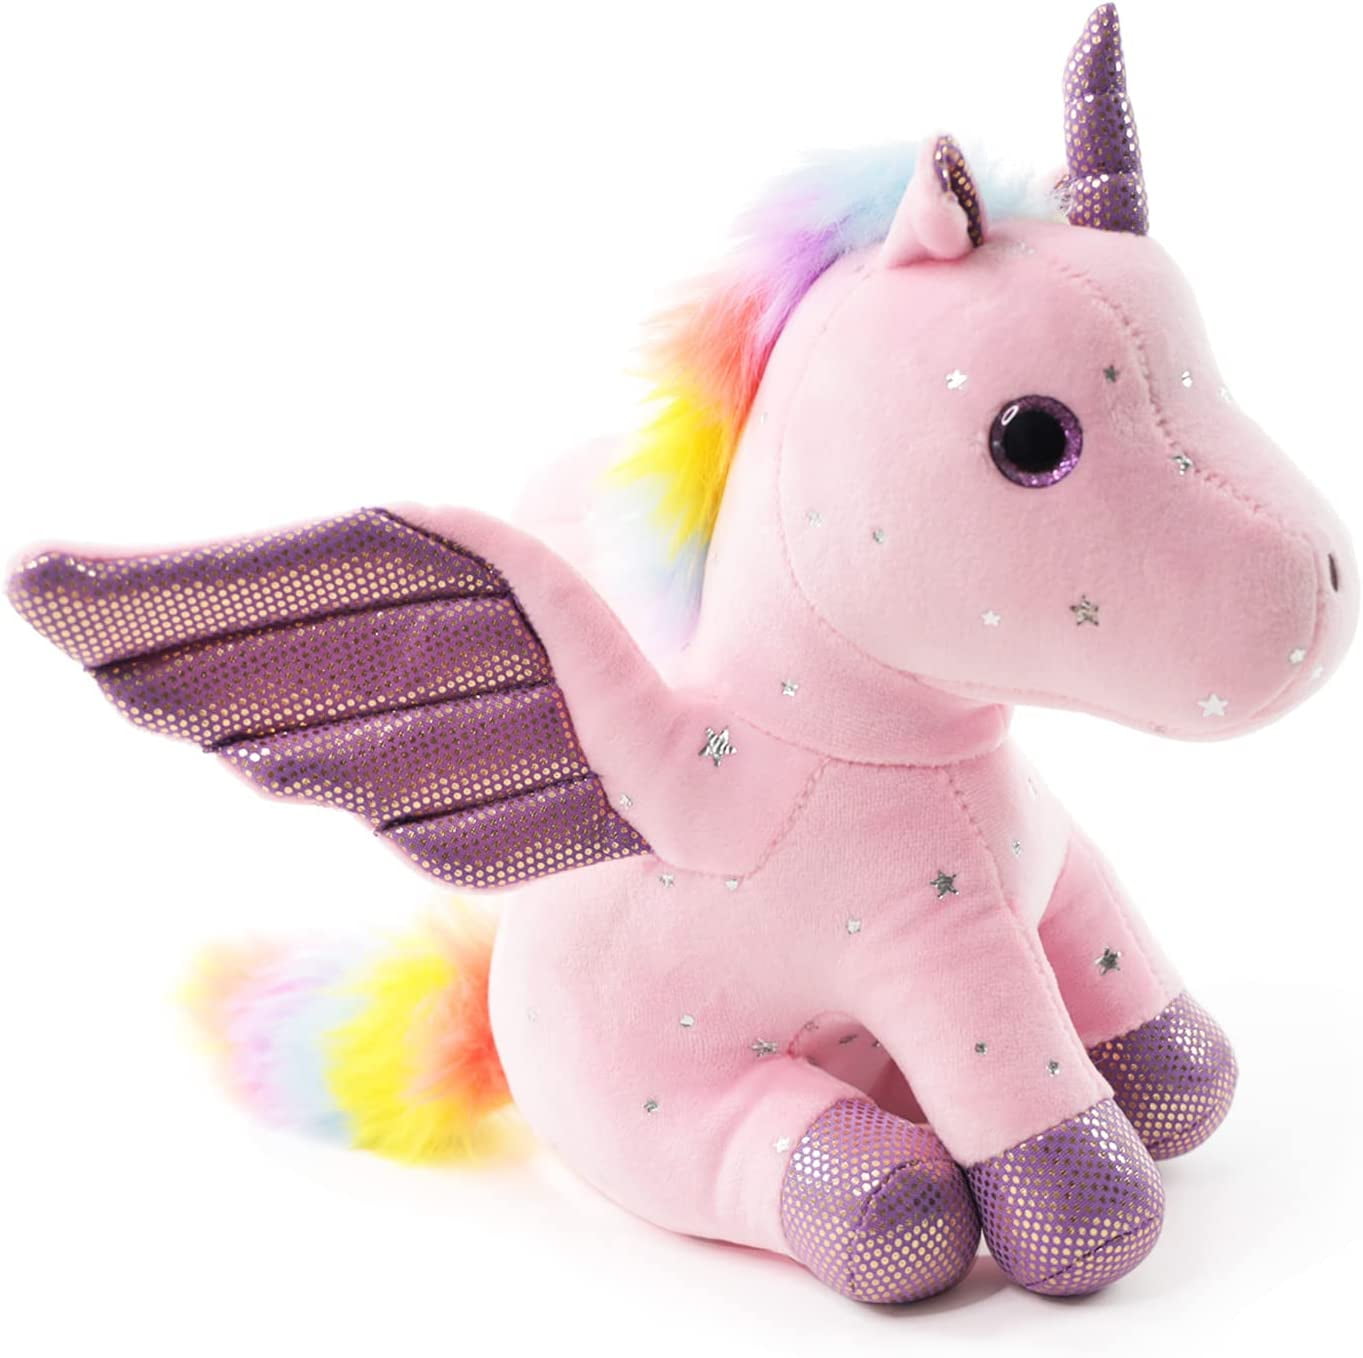 unicorn plush toys for girls and boys over 3 years old, one giant unicorn  and four mini baby unicorns for mothers, lovely soft unicorn toys,  children's gifts, birthday, Christmas 